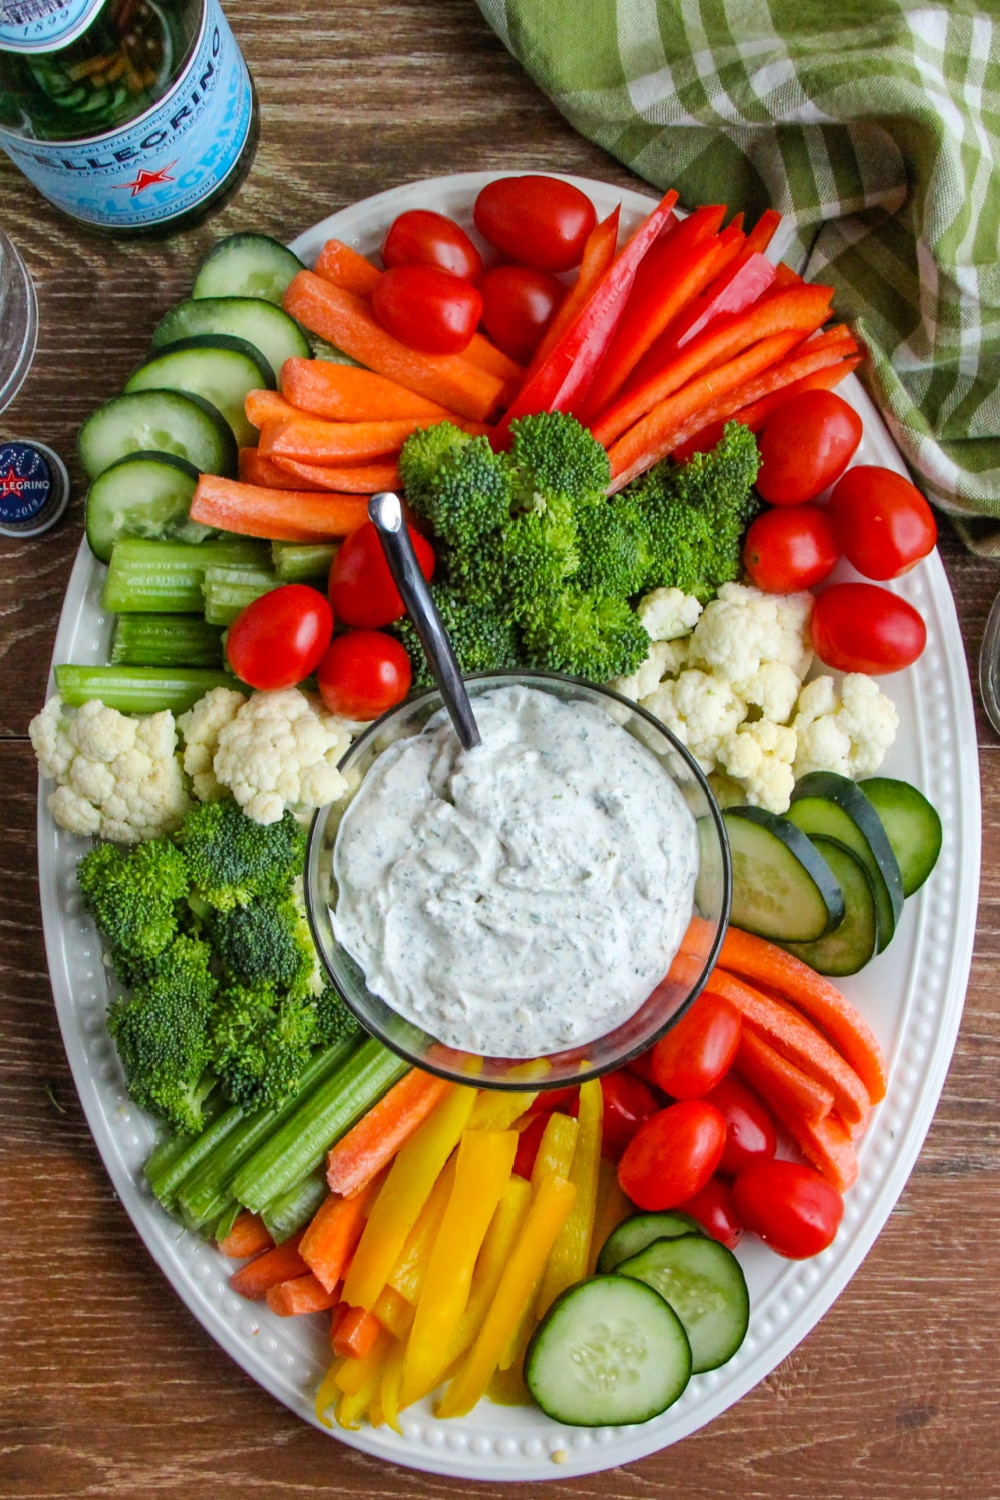 A tray of vegetables with ranch dip.